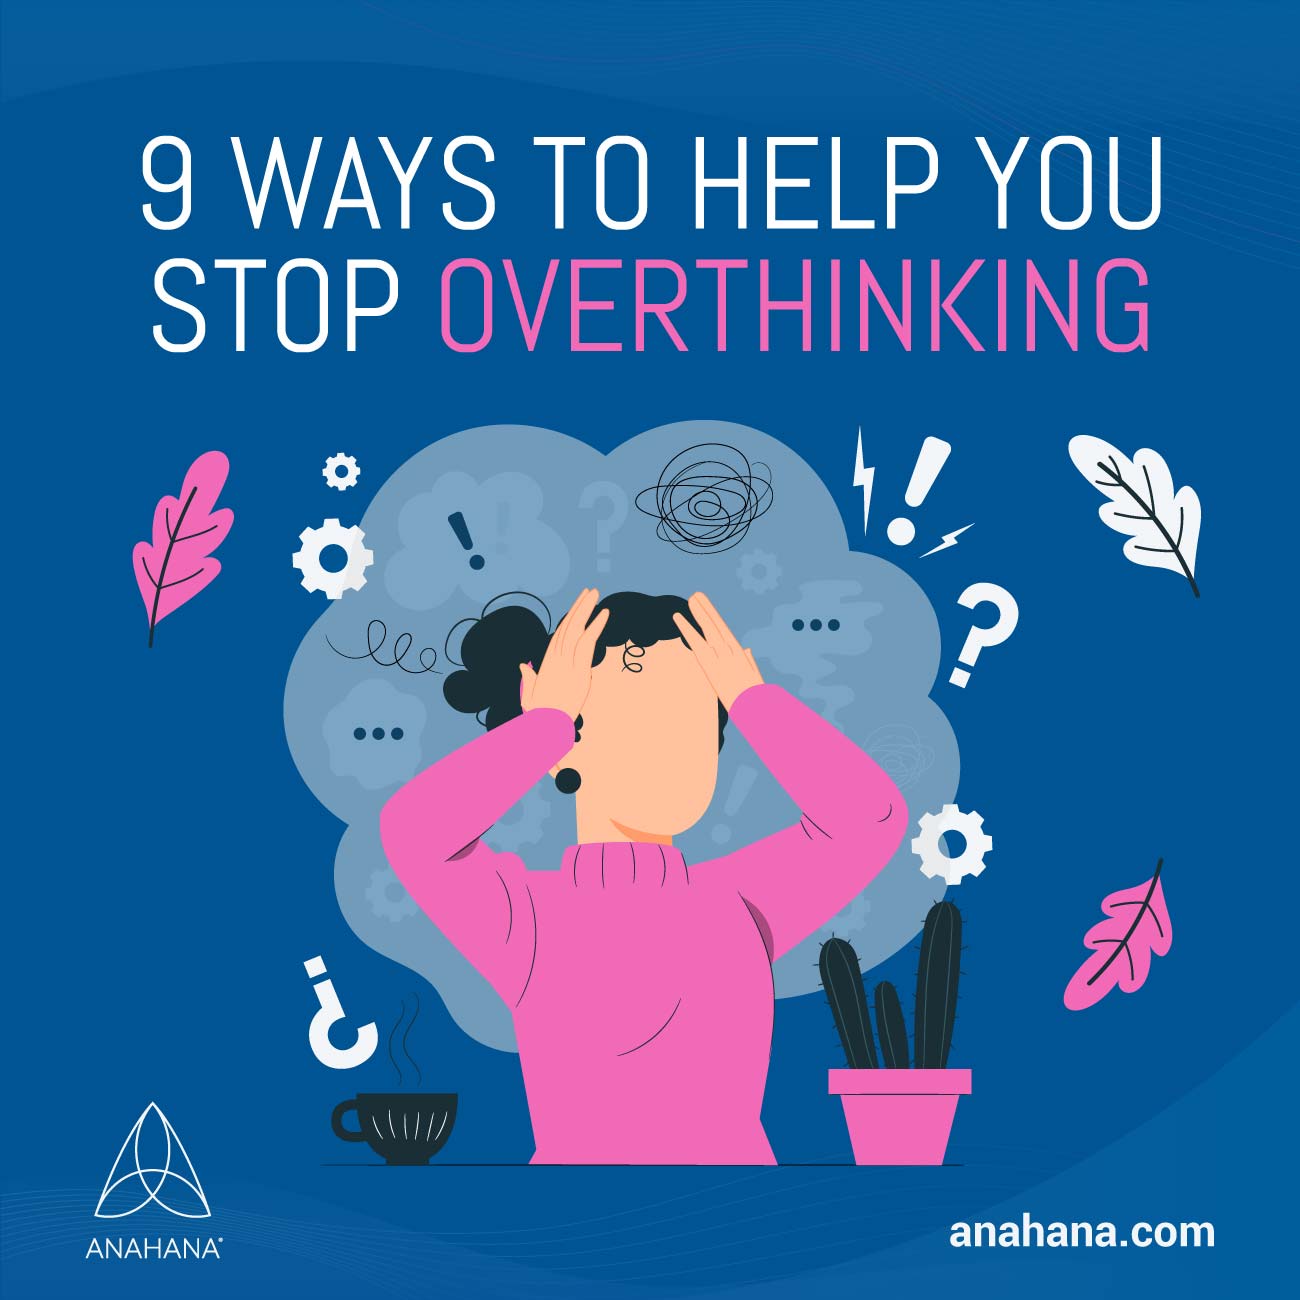 9 ways to help you stop overthinking